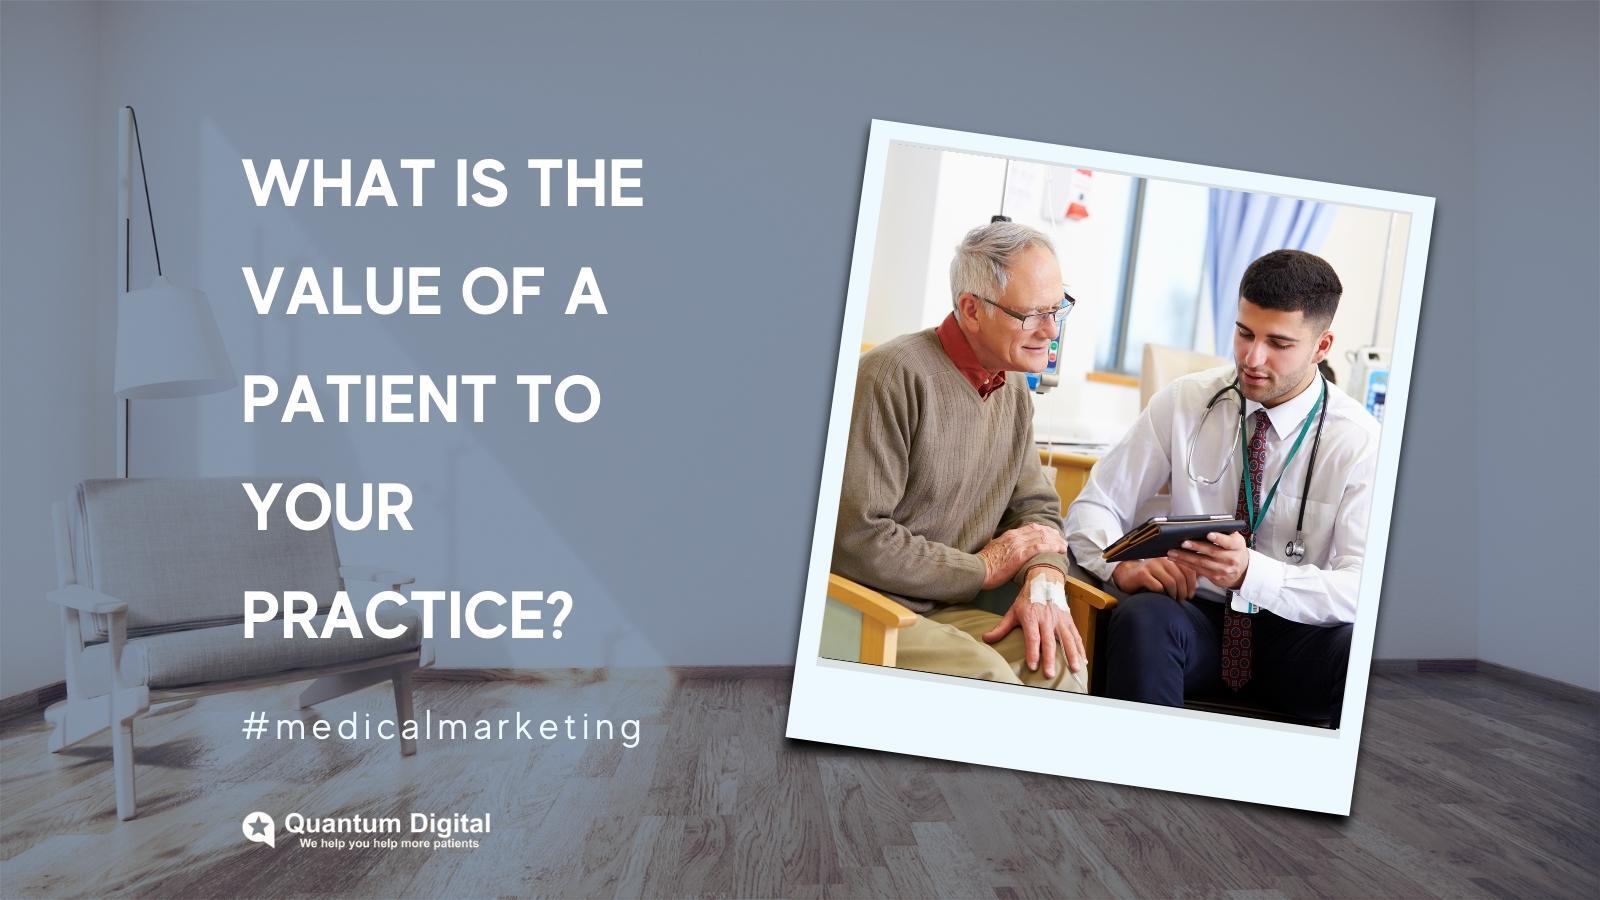 Understand how to improve your average patient value